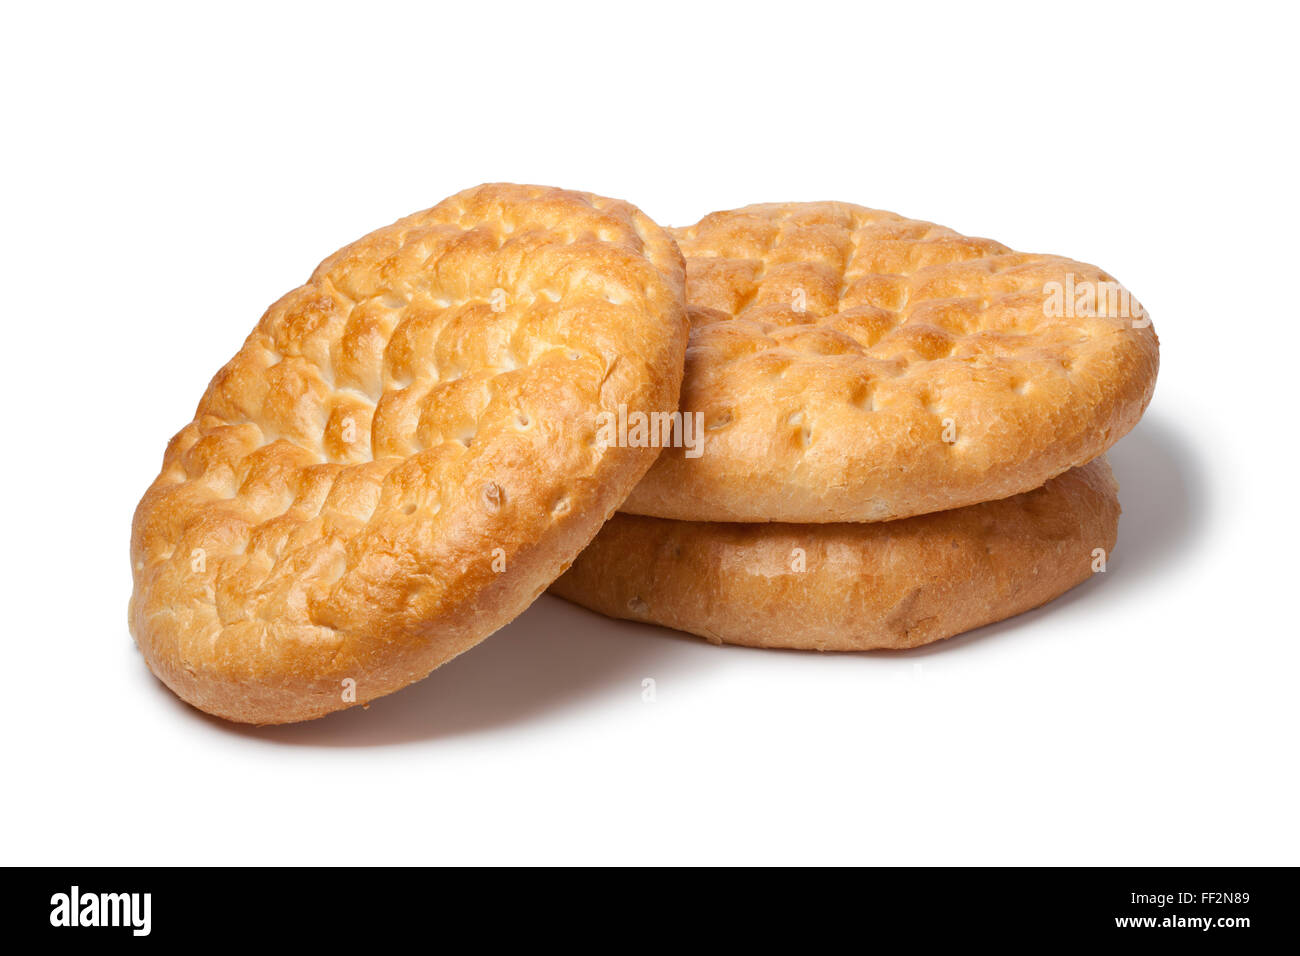 Whole traditional Turkish white bread called pide on white background Stock Photo